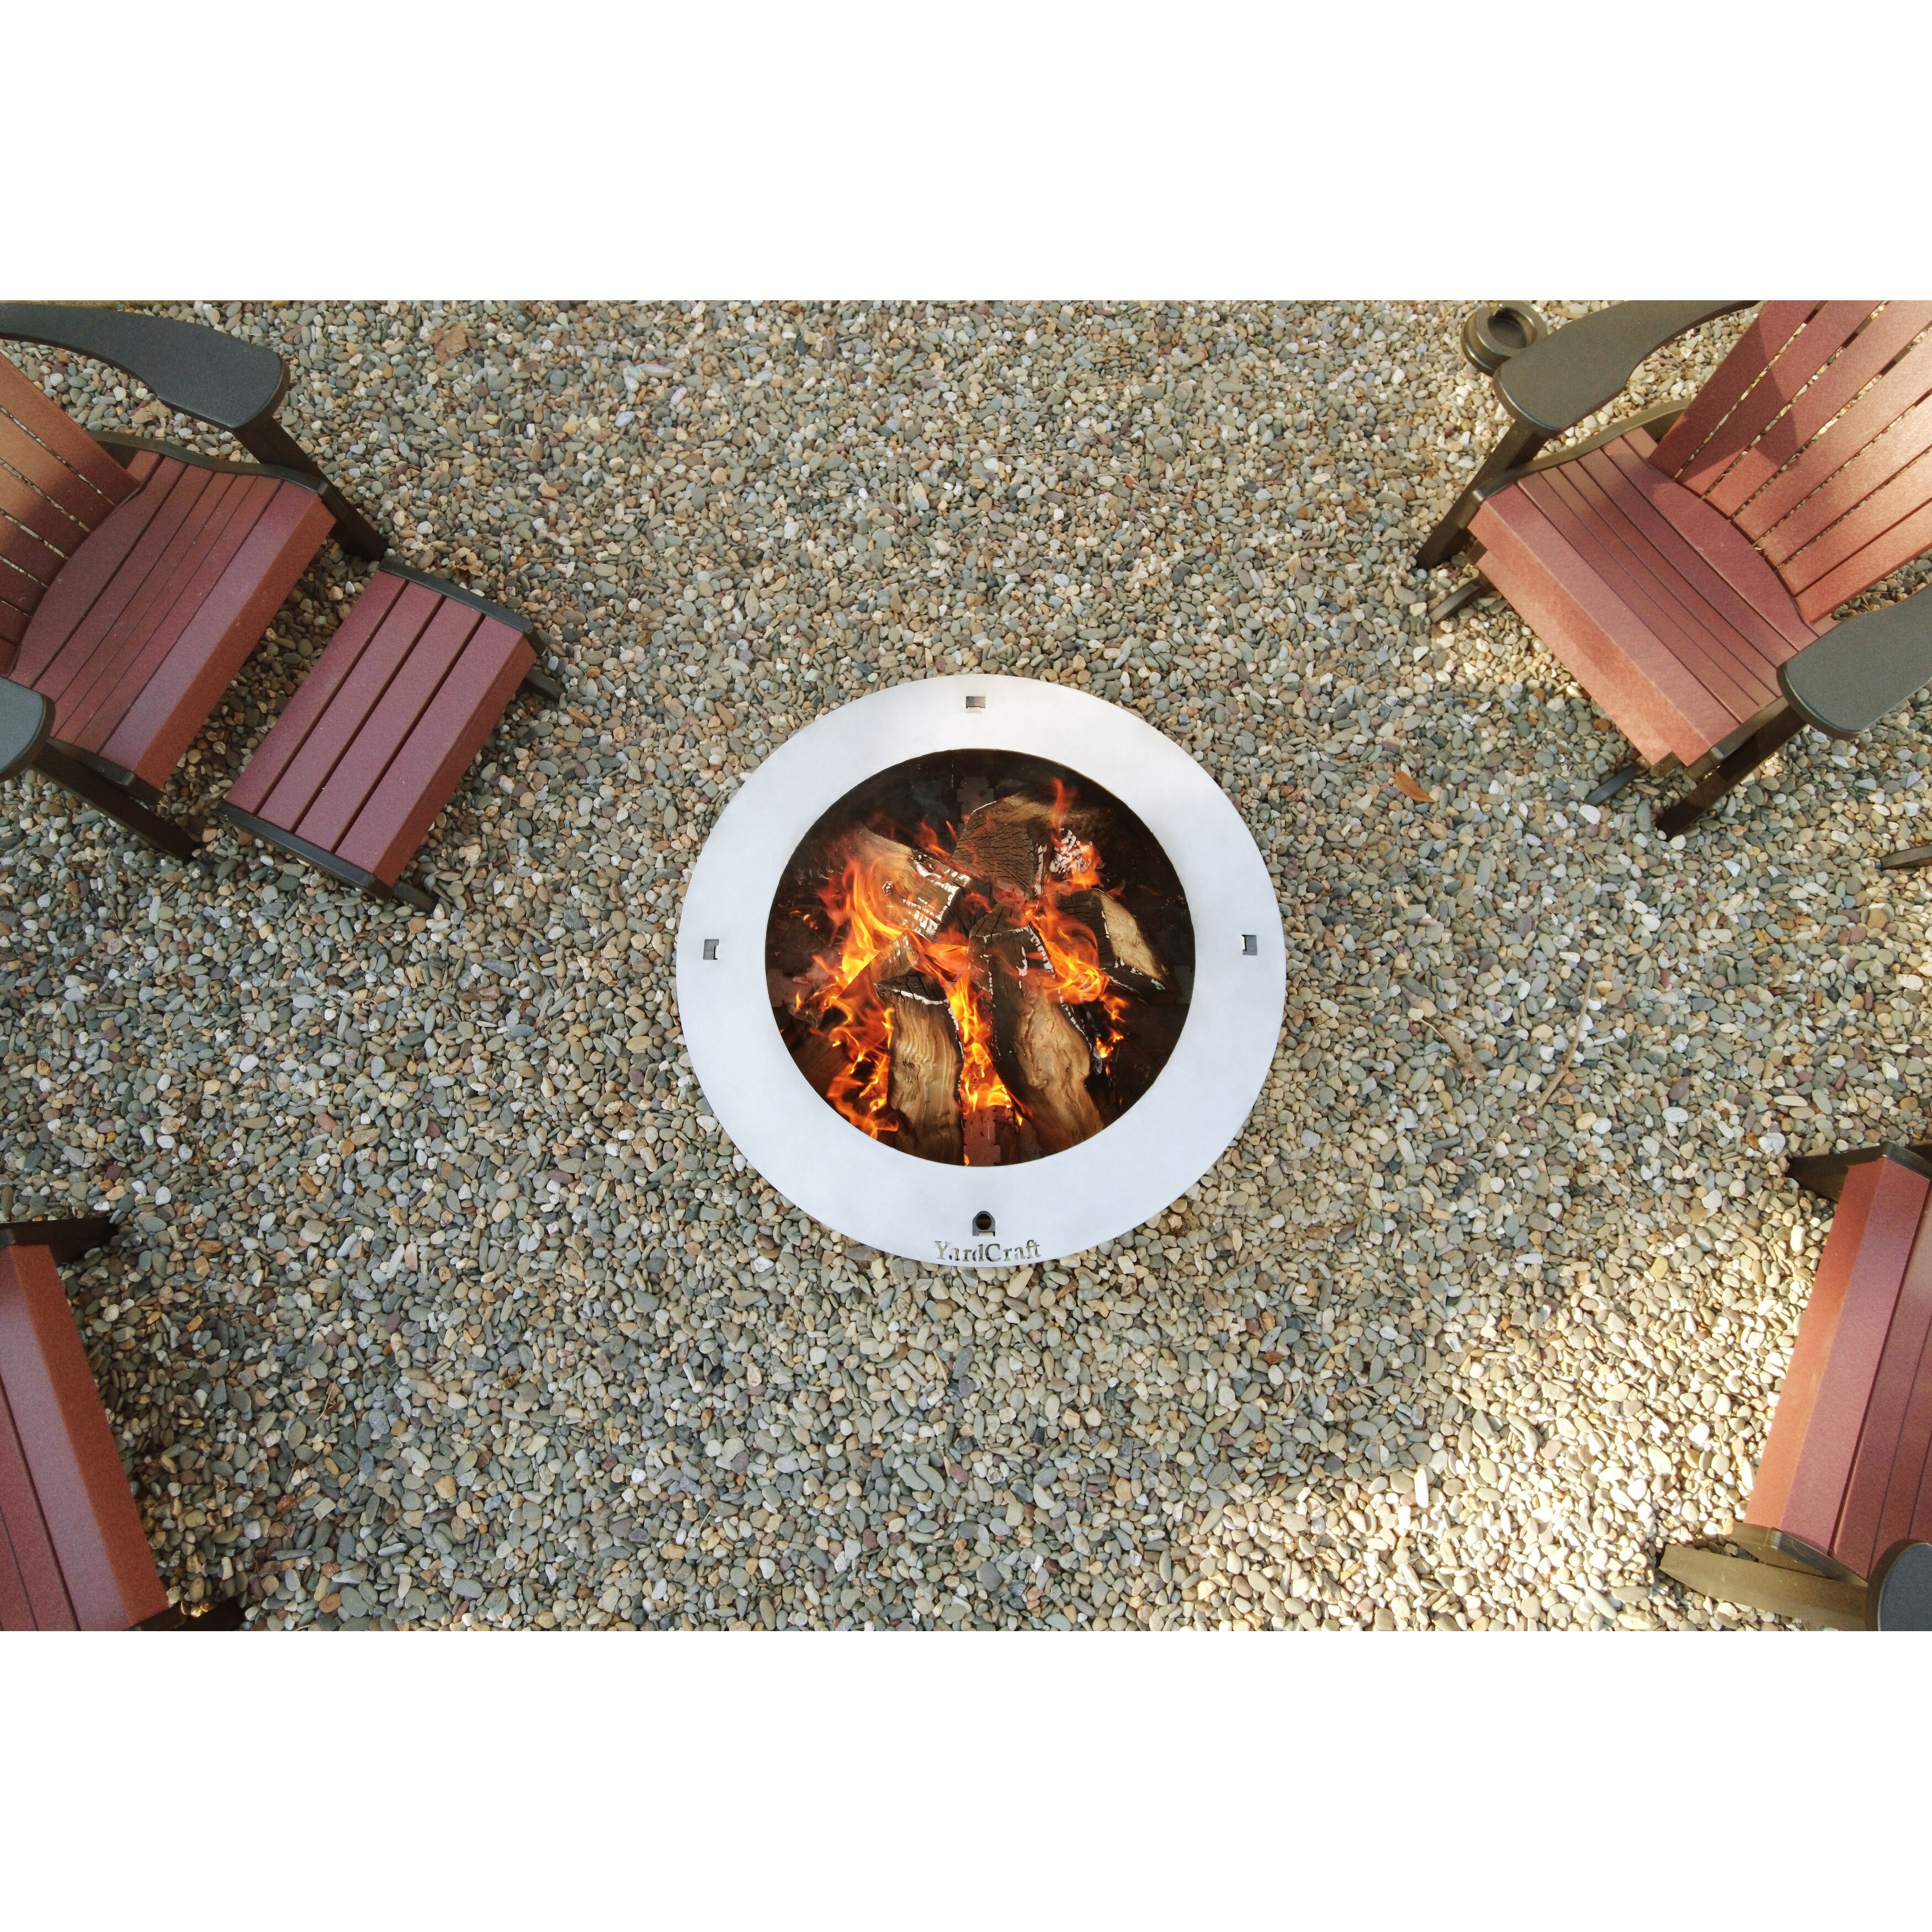 The Forge Smokeless Fire Pit No Grill Overstock 33546965